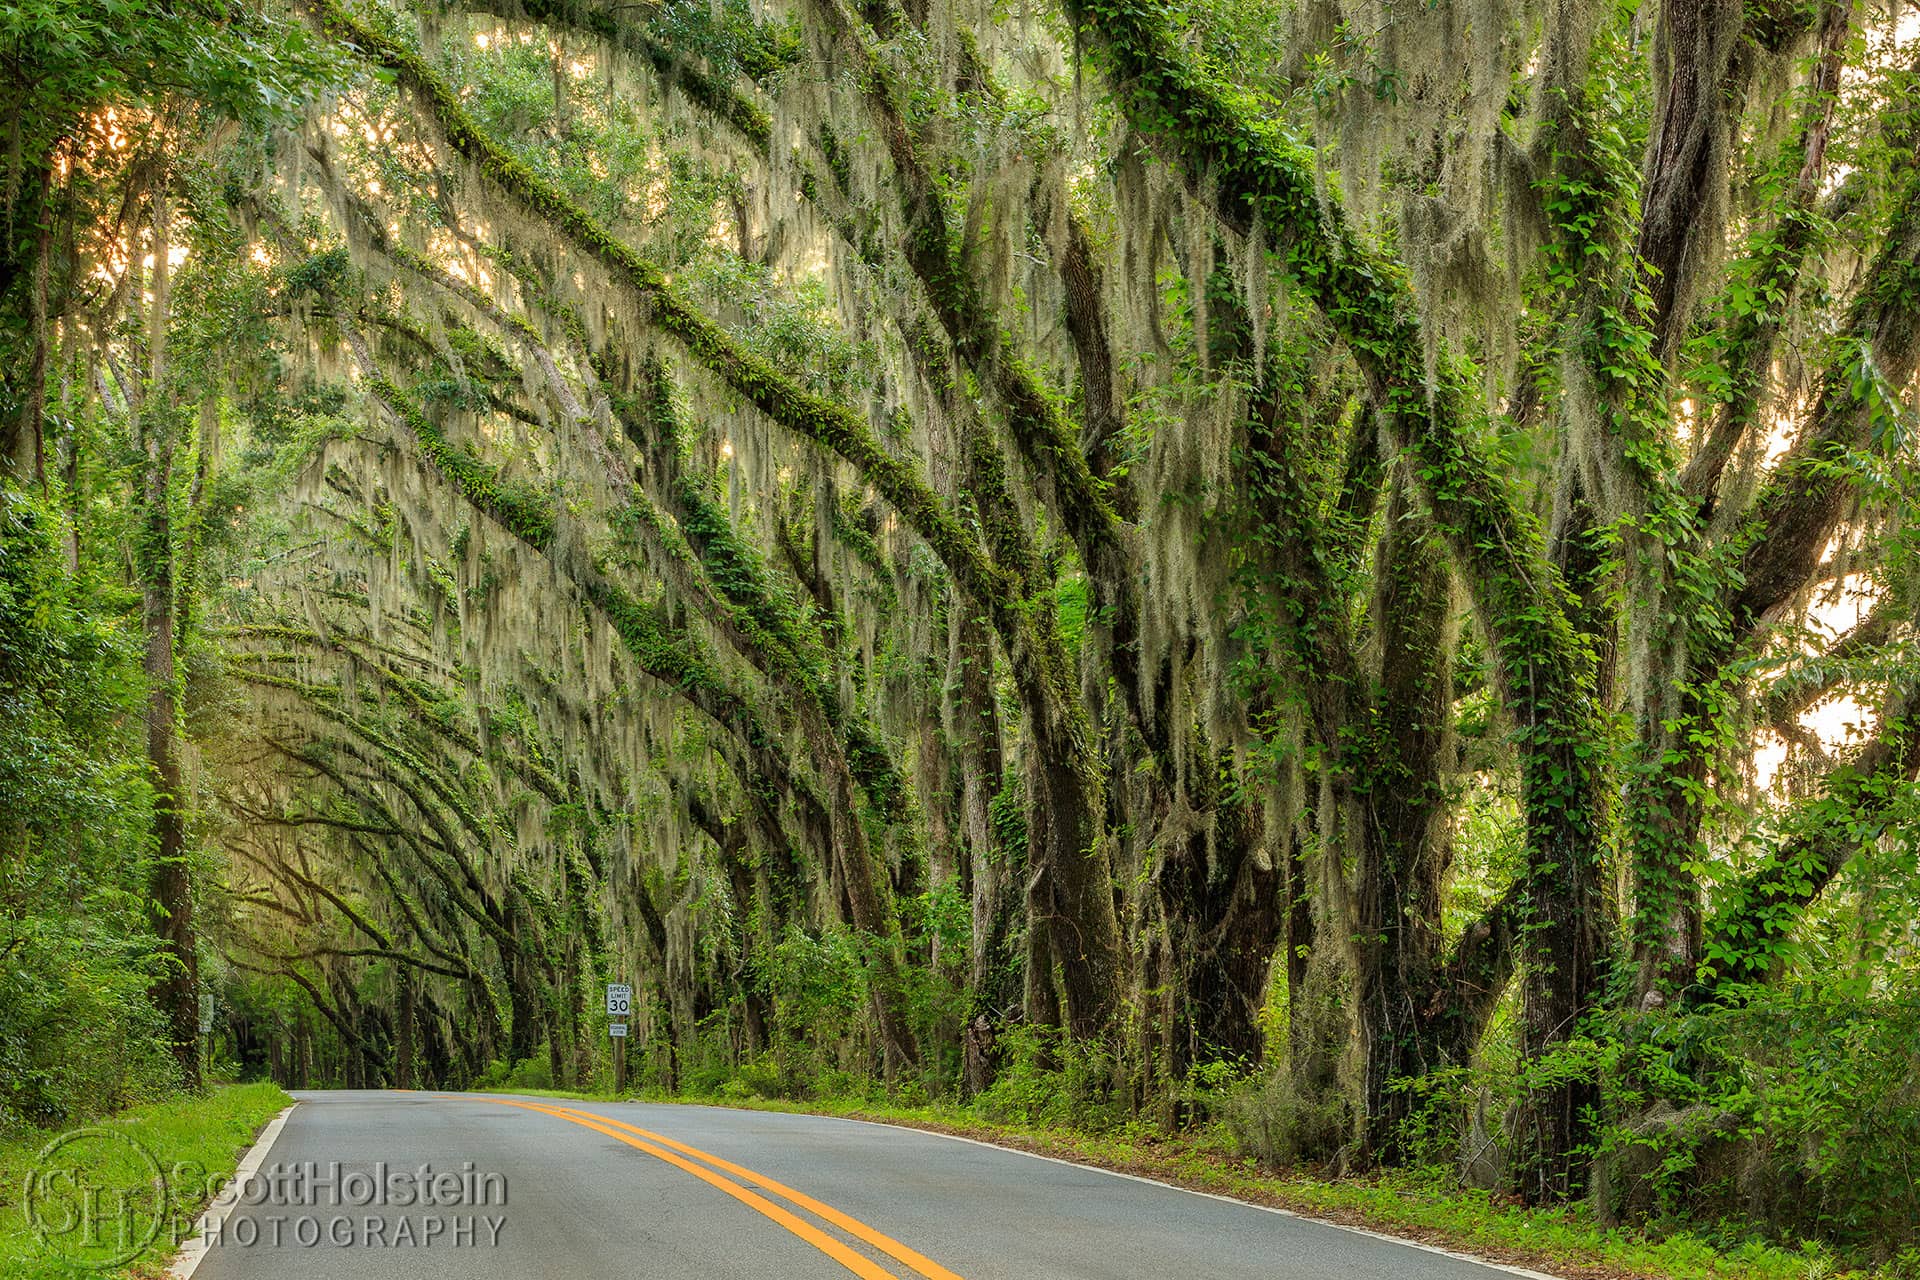 Miller Landing Road is a scenic drive in Tallahassee that leads from Meridian Road to Miller Landing on Lake Jackson.